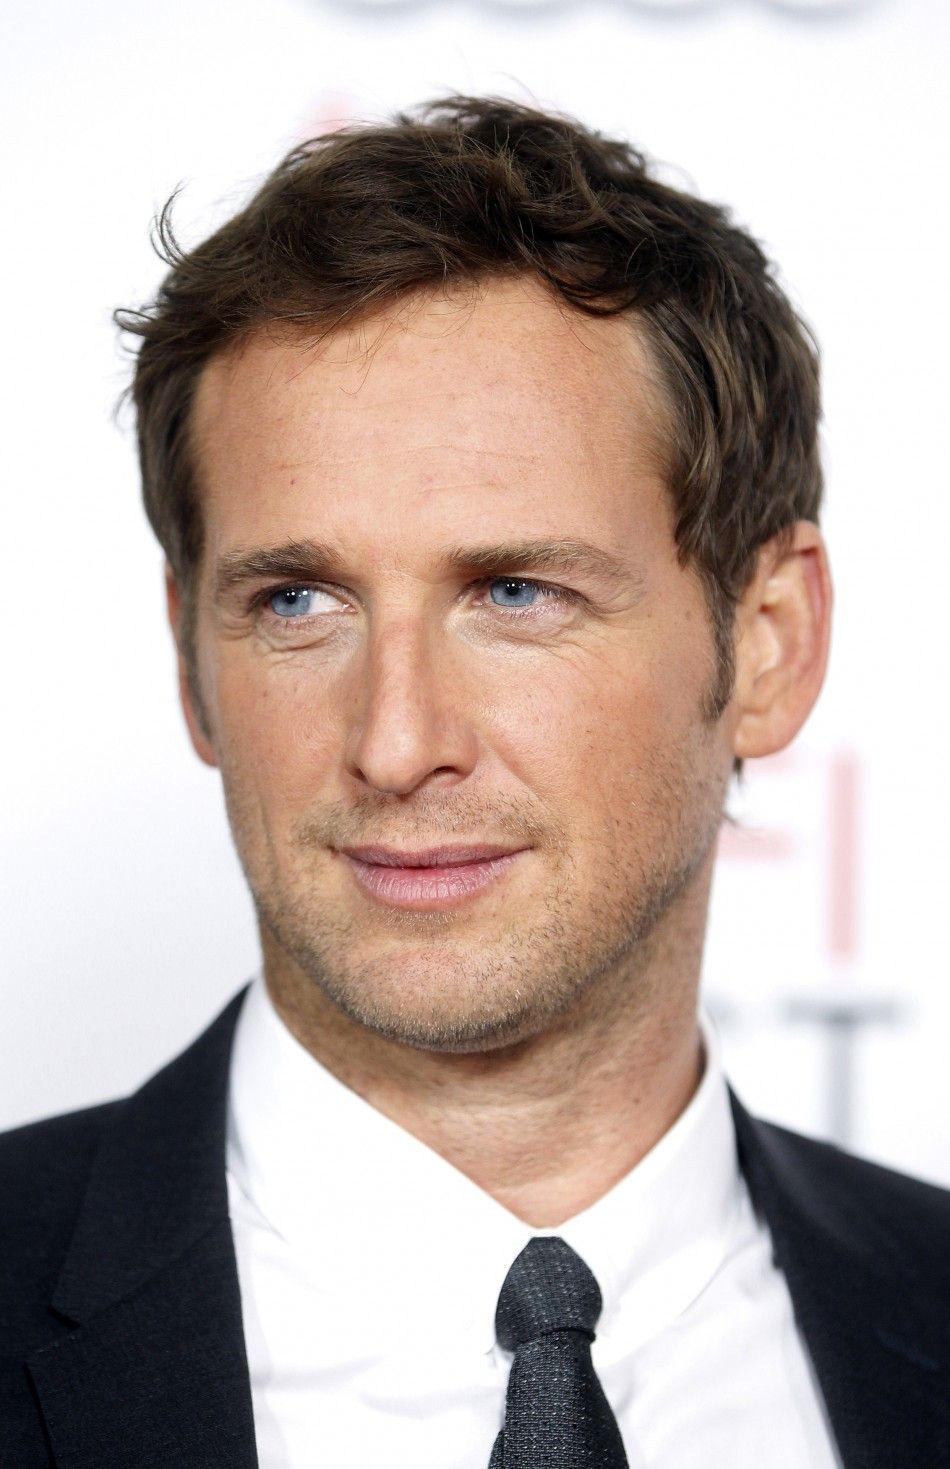 Actor Josh Lucas poses at the opening night gala for AFI Fest 2011 with the premiere of his new film film quotJ. Edgarquot directed by Clint Eastwood in Hollywood 